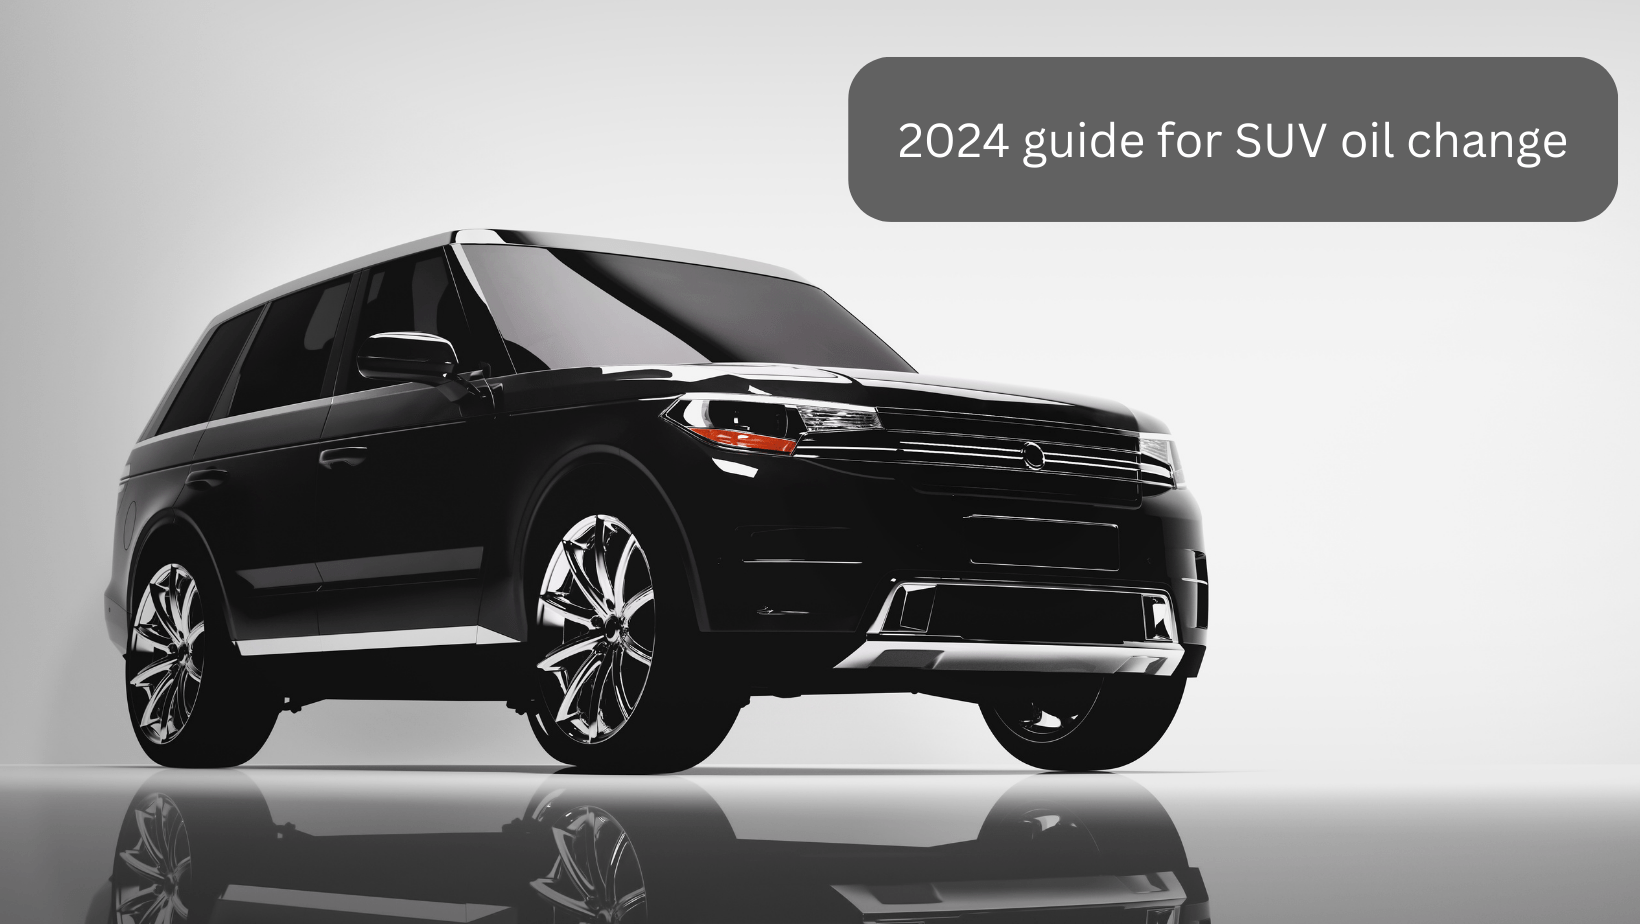 Optimal intervals for SUVs in our guide